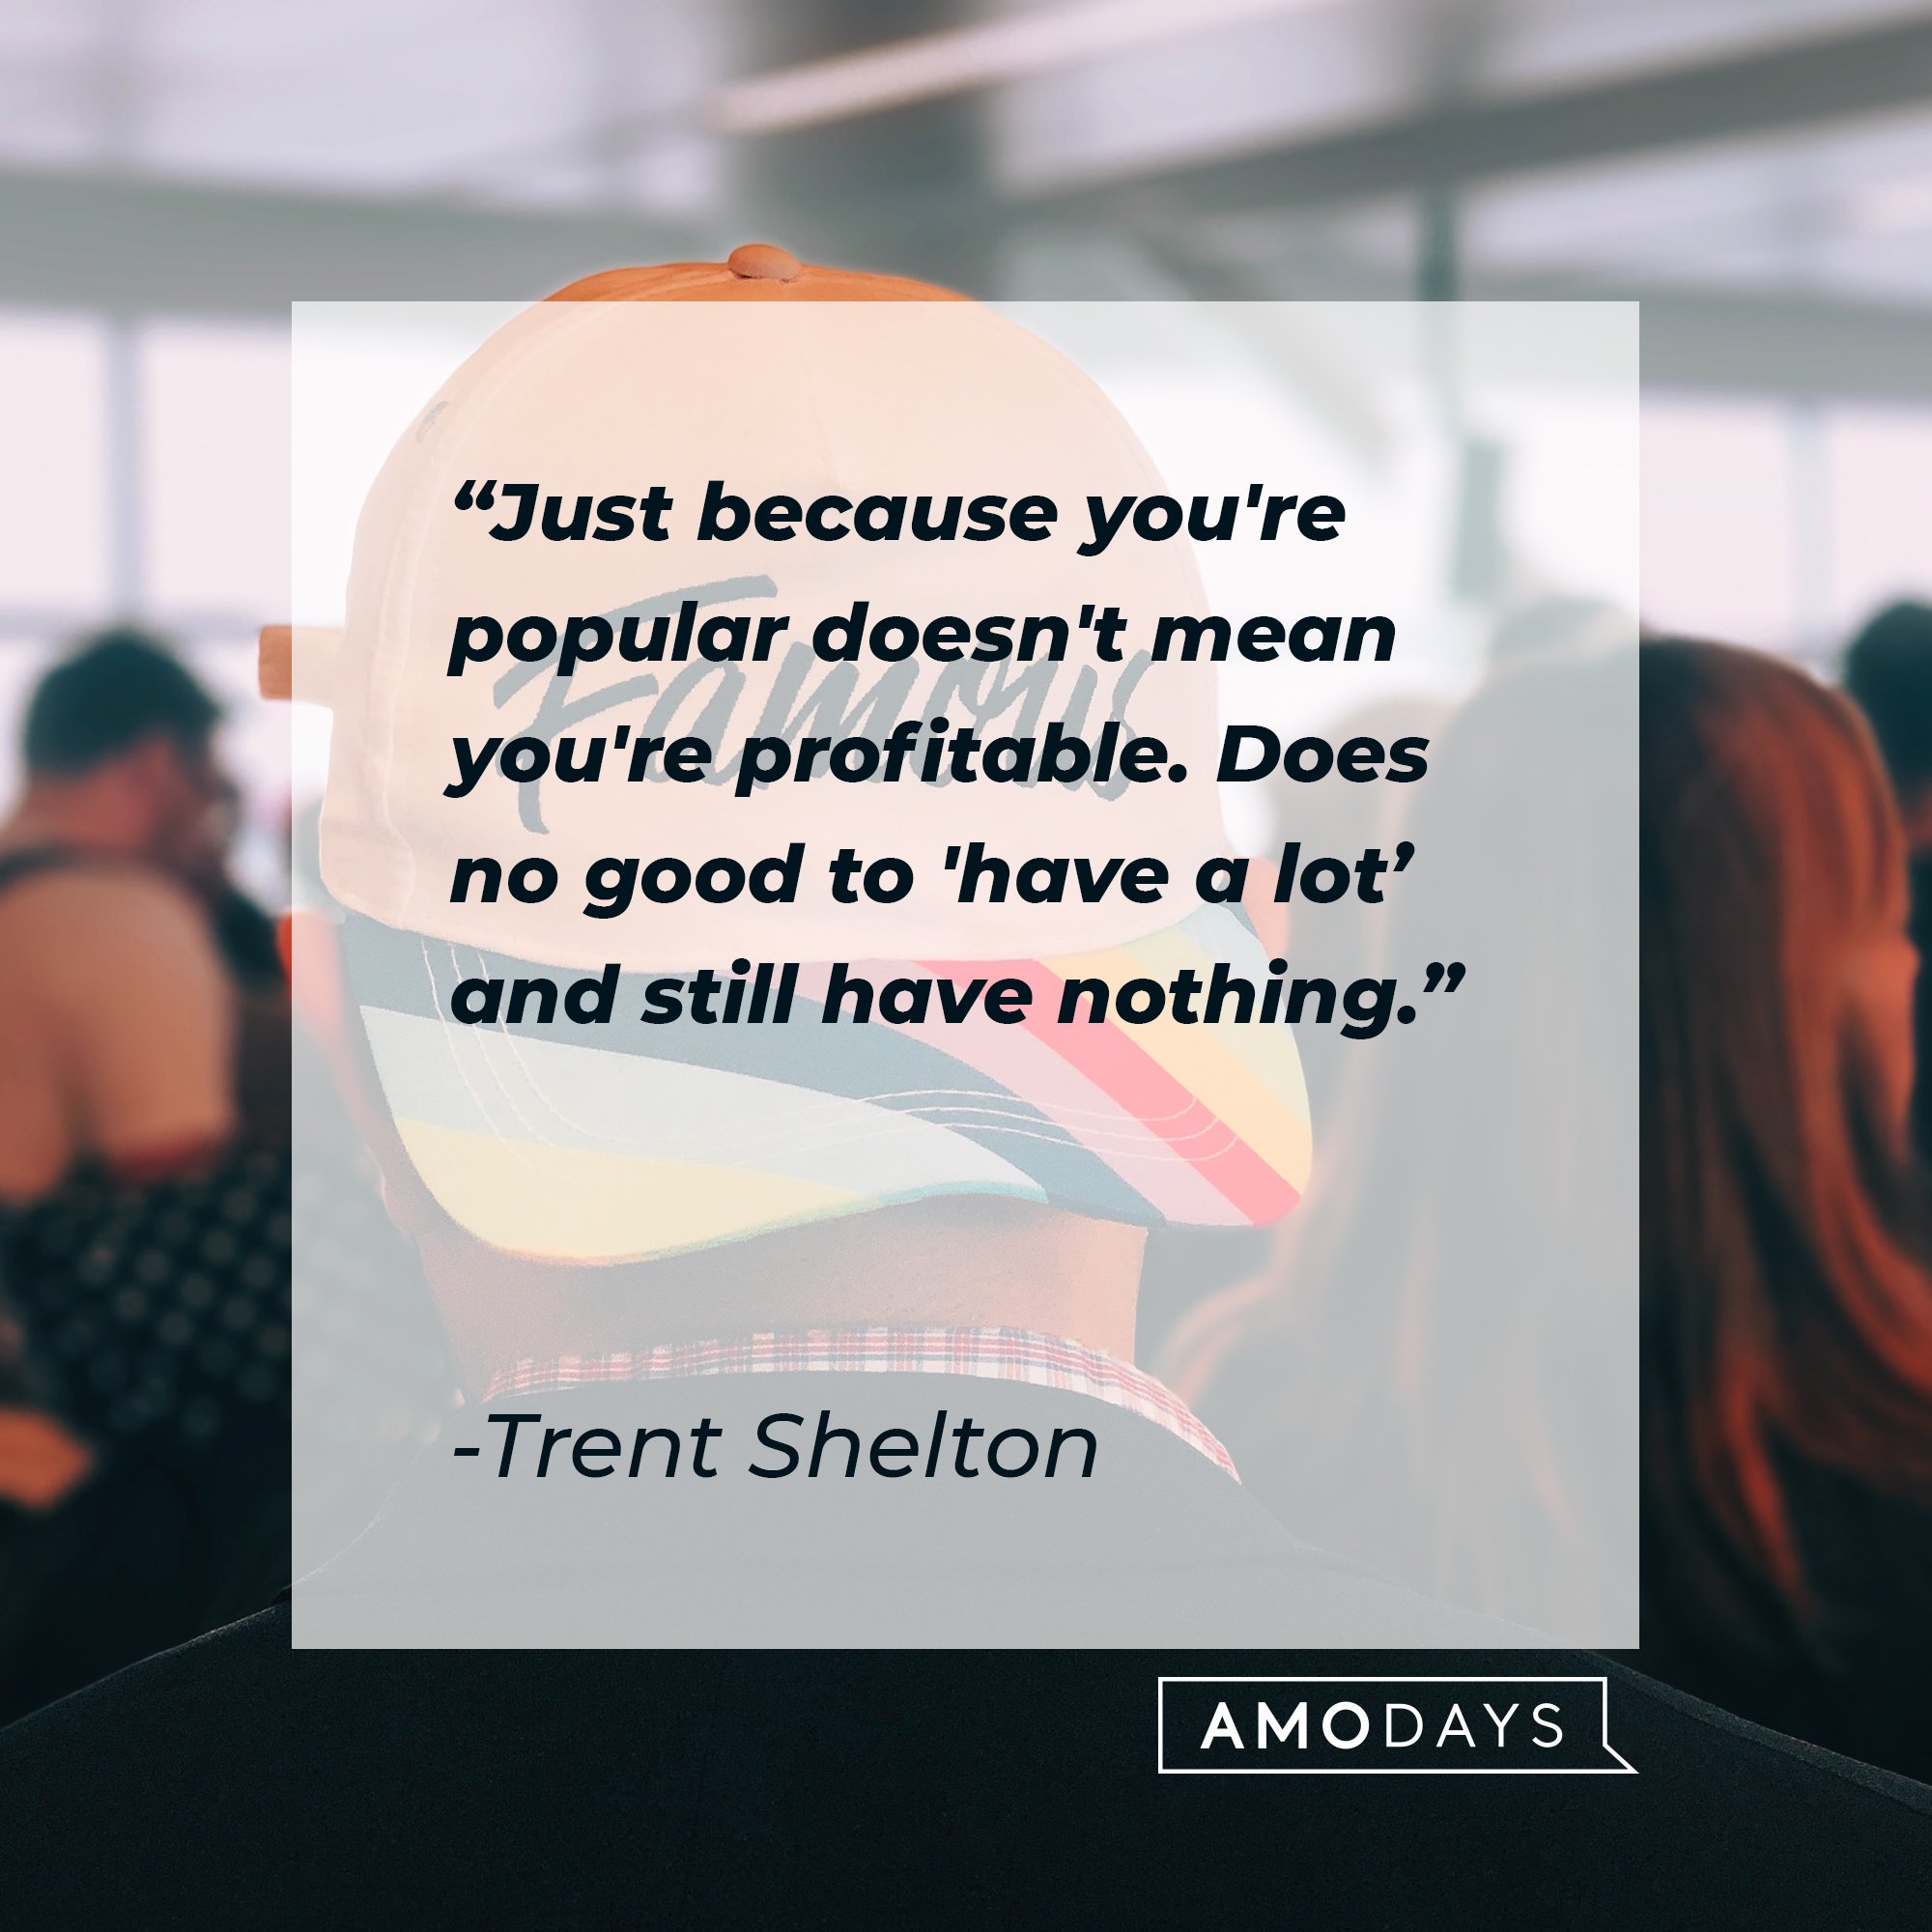  Trent Shelton's quote: “Just because you're popular doesn't mean you're profitable. Does no good to 'have a lot' and still have nothing." | Image: AmoDays